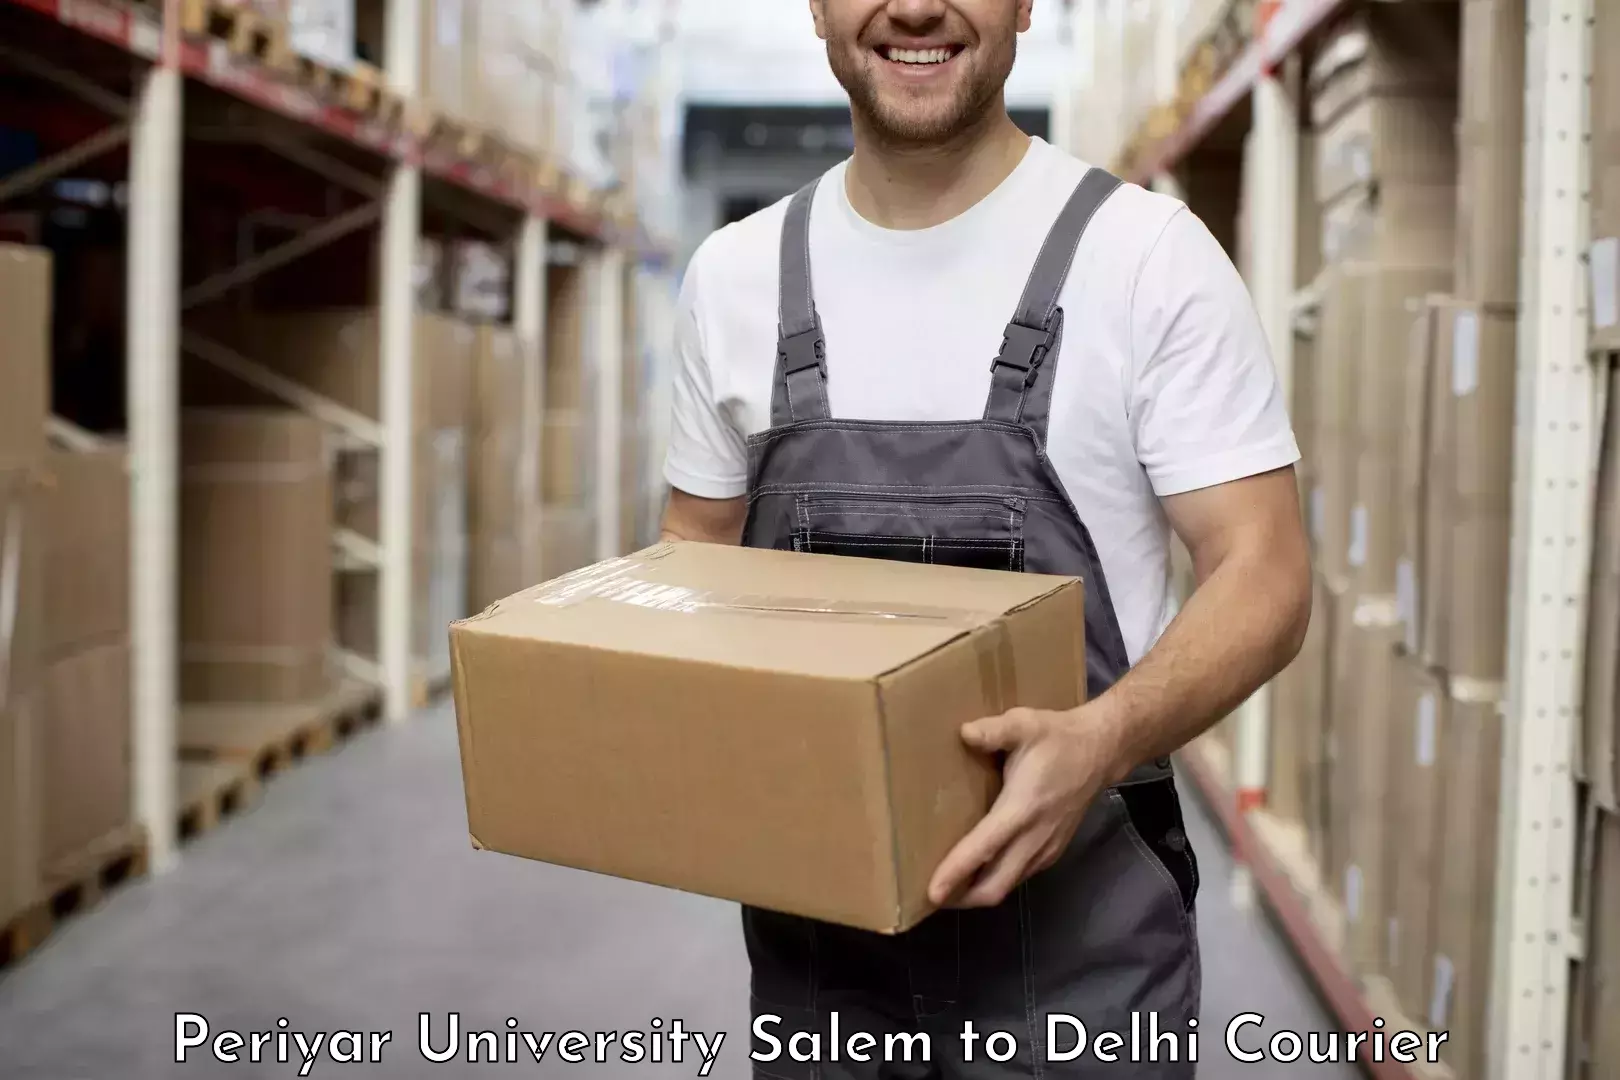 Express courier capabilities in Periyar University Salem to NCR